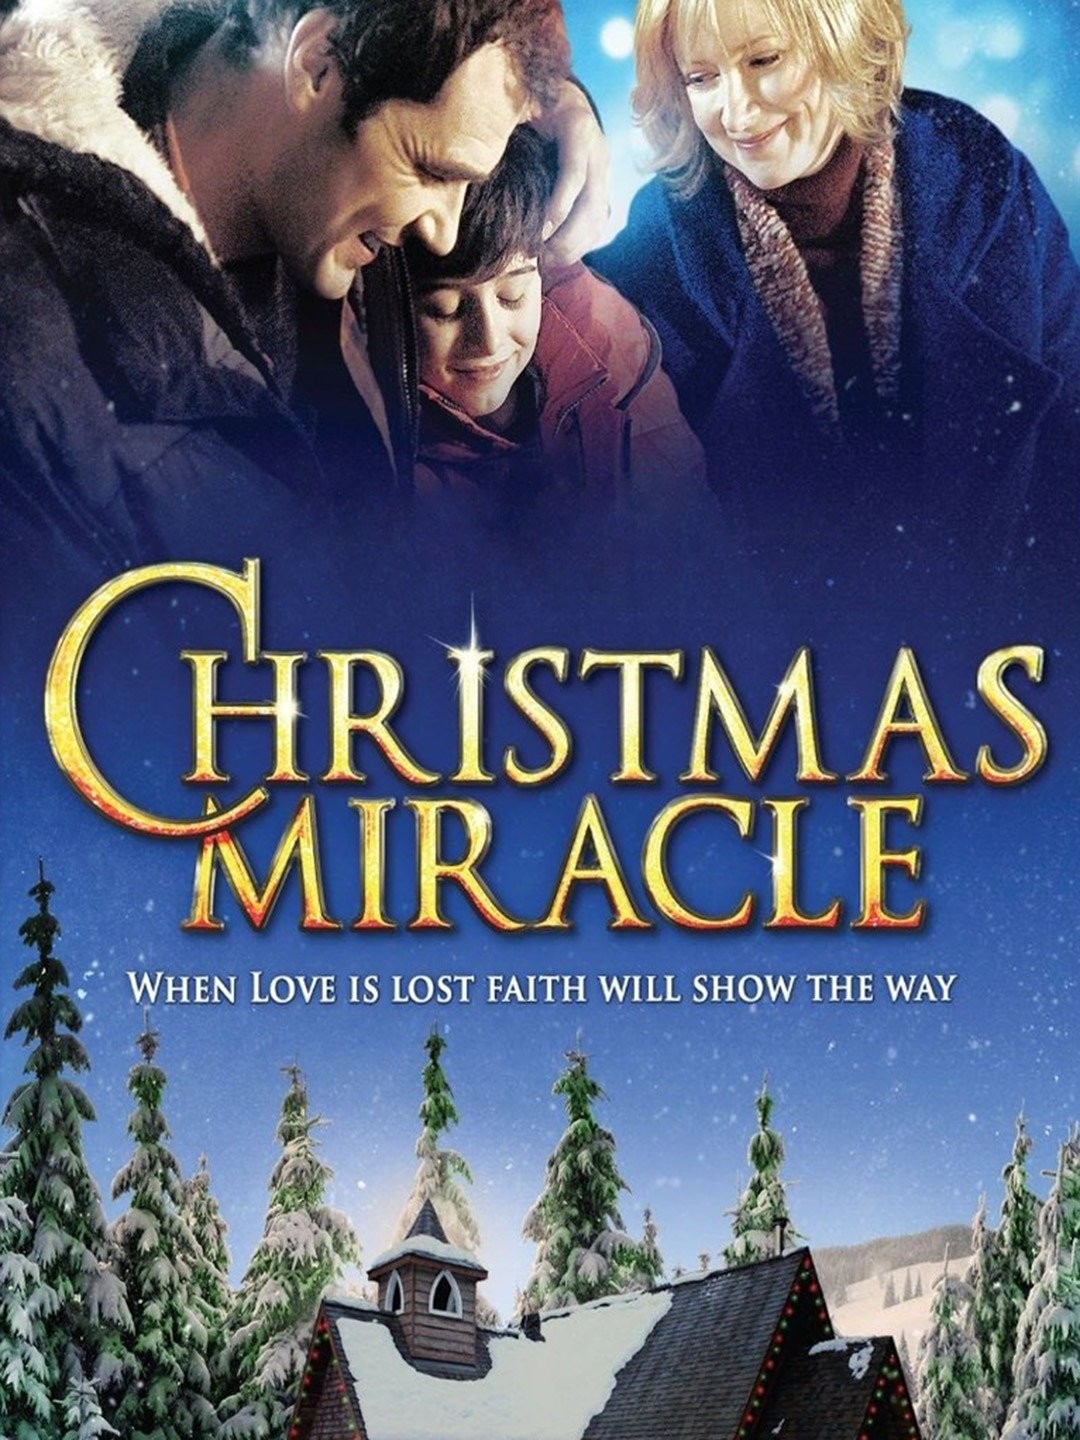 Christmas movie miracles are never miracles at all - Vox